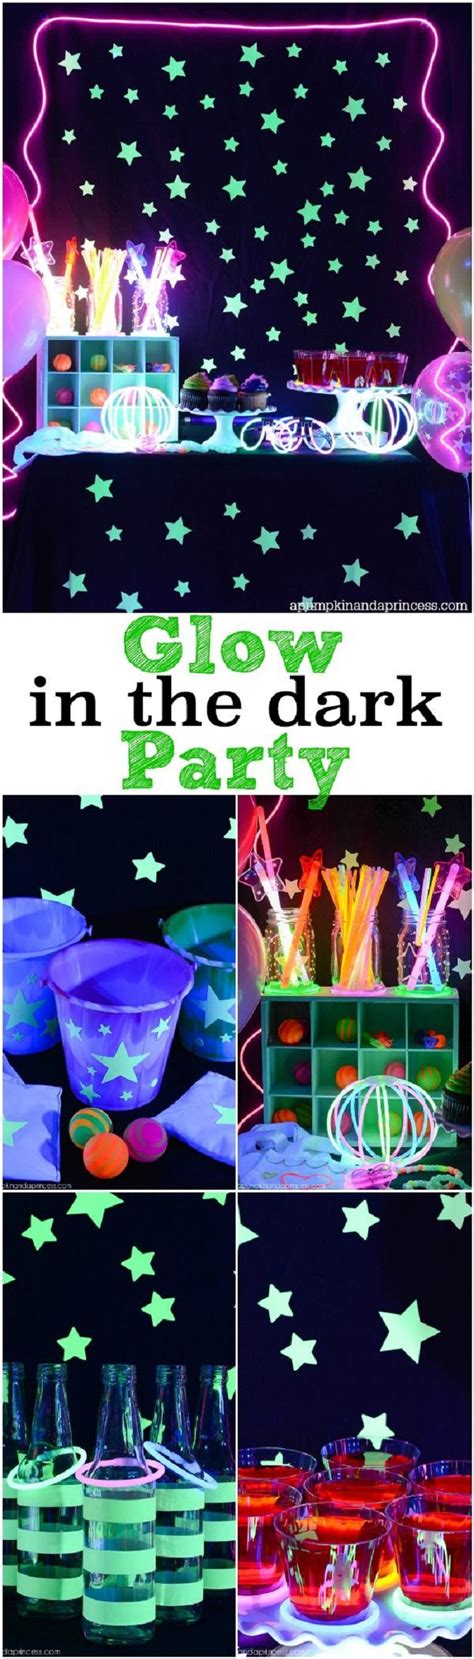 20 Unique Party Ideas Your Friends Will Have A Blast Getting Ready For 14